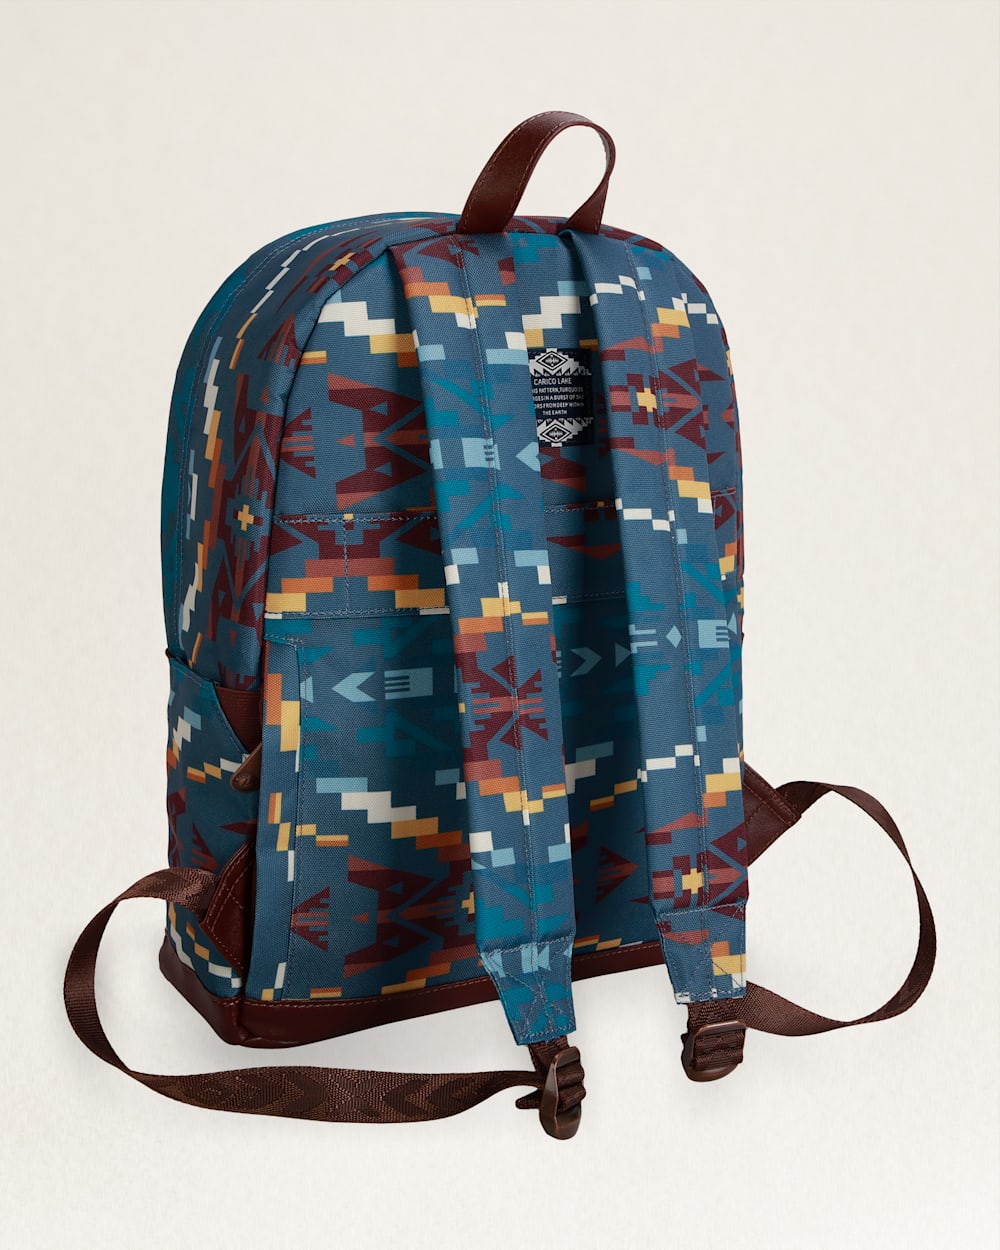 ALTERNATE VIEW OF CARICO LAKE TRAVEL BACKPACK IN BLUE image number 5